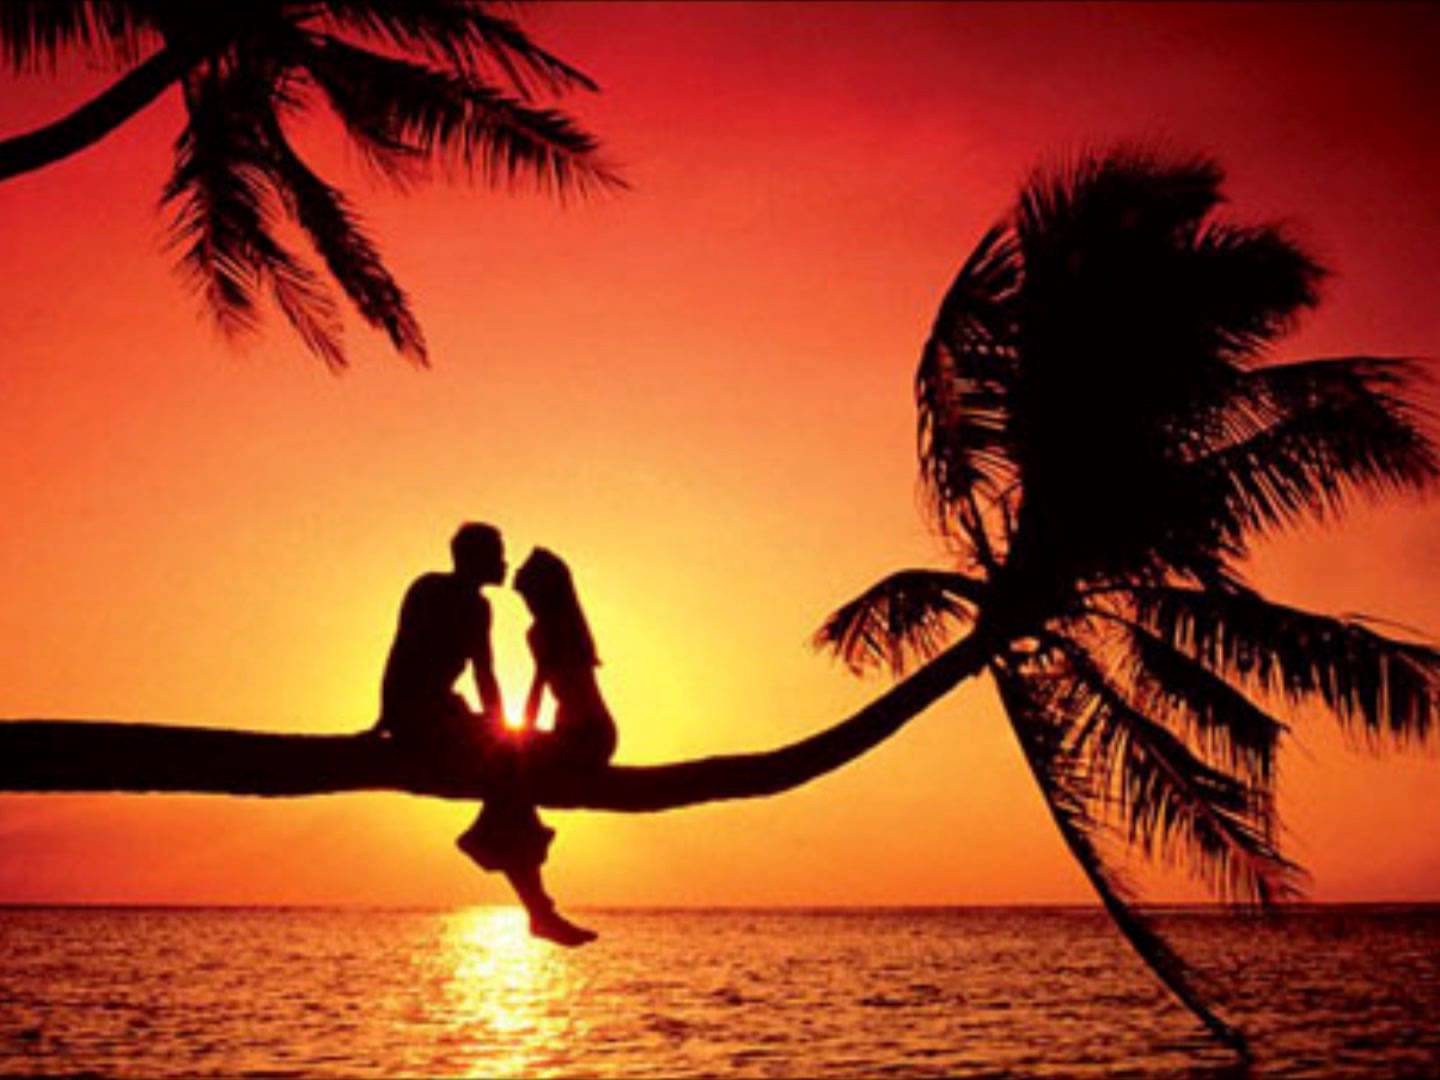 Sweet Lovers Image Wallpaper | Download cool HD wallpapers here.